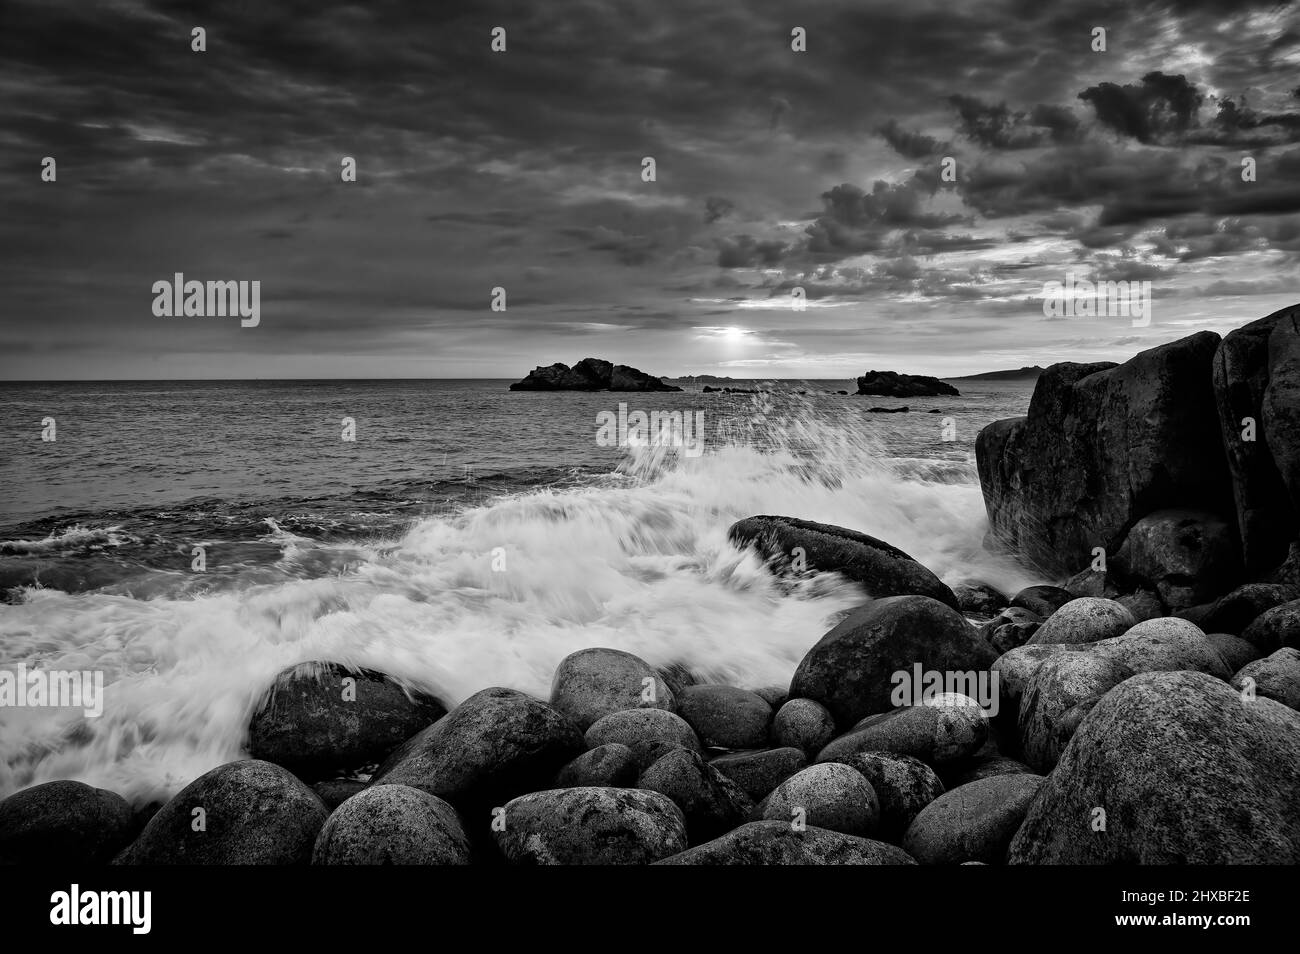 The isles of scilly, mono image Stock Photo